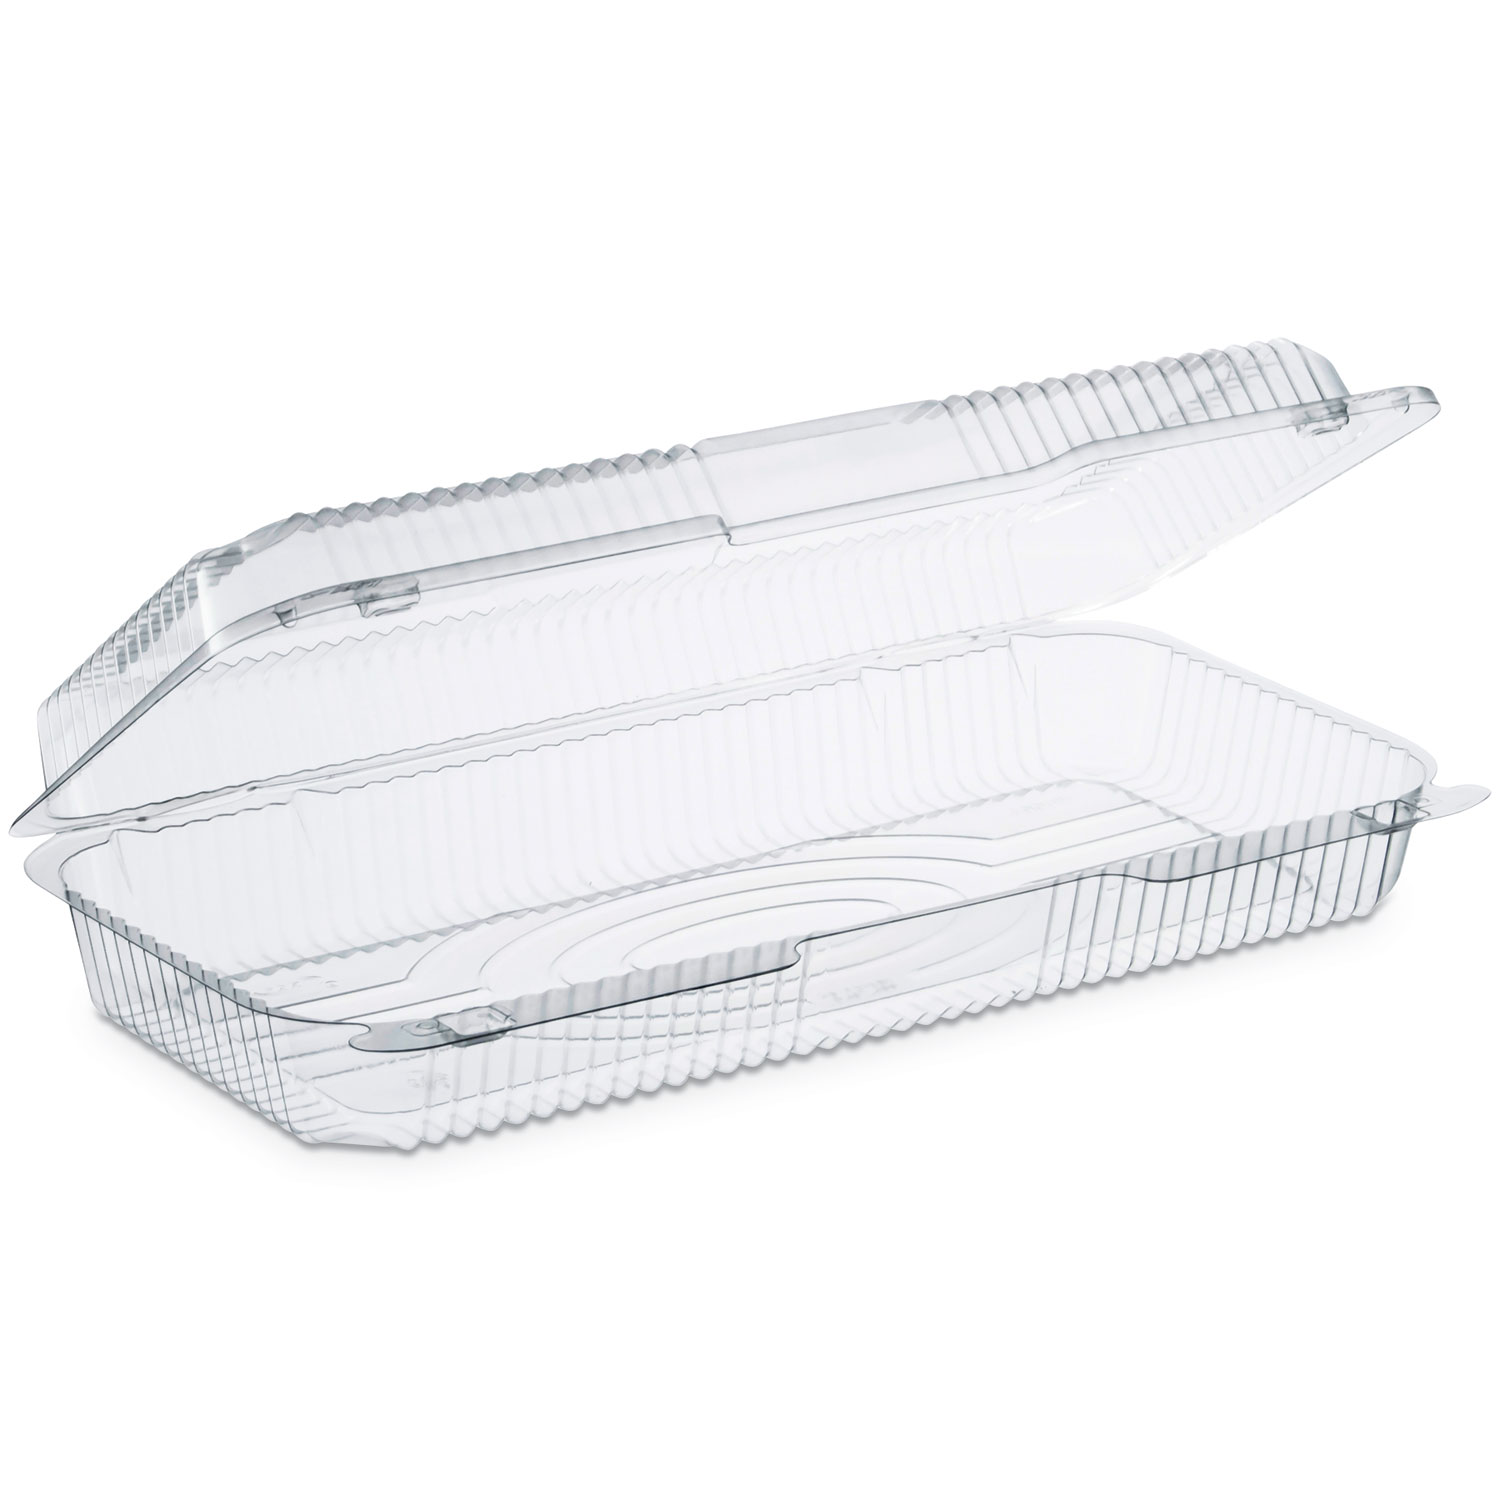  Dart C90UT1 StayLock Clear Hinged Lid Containers, 50.2 oz, 6.8w x 13.4l x 2.6h, 200/Carton (DCCC90UT1) 